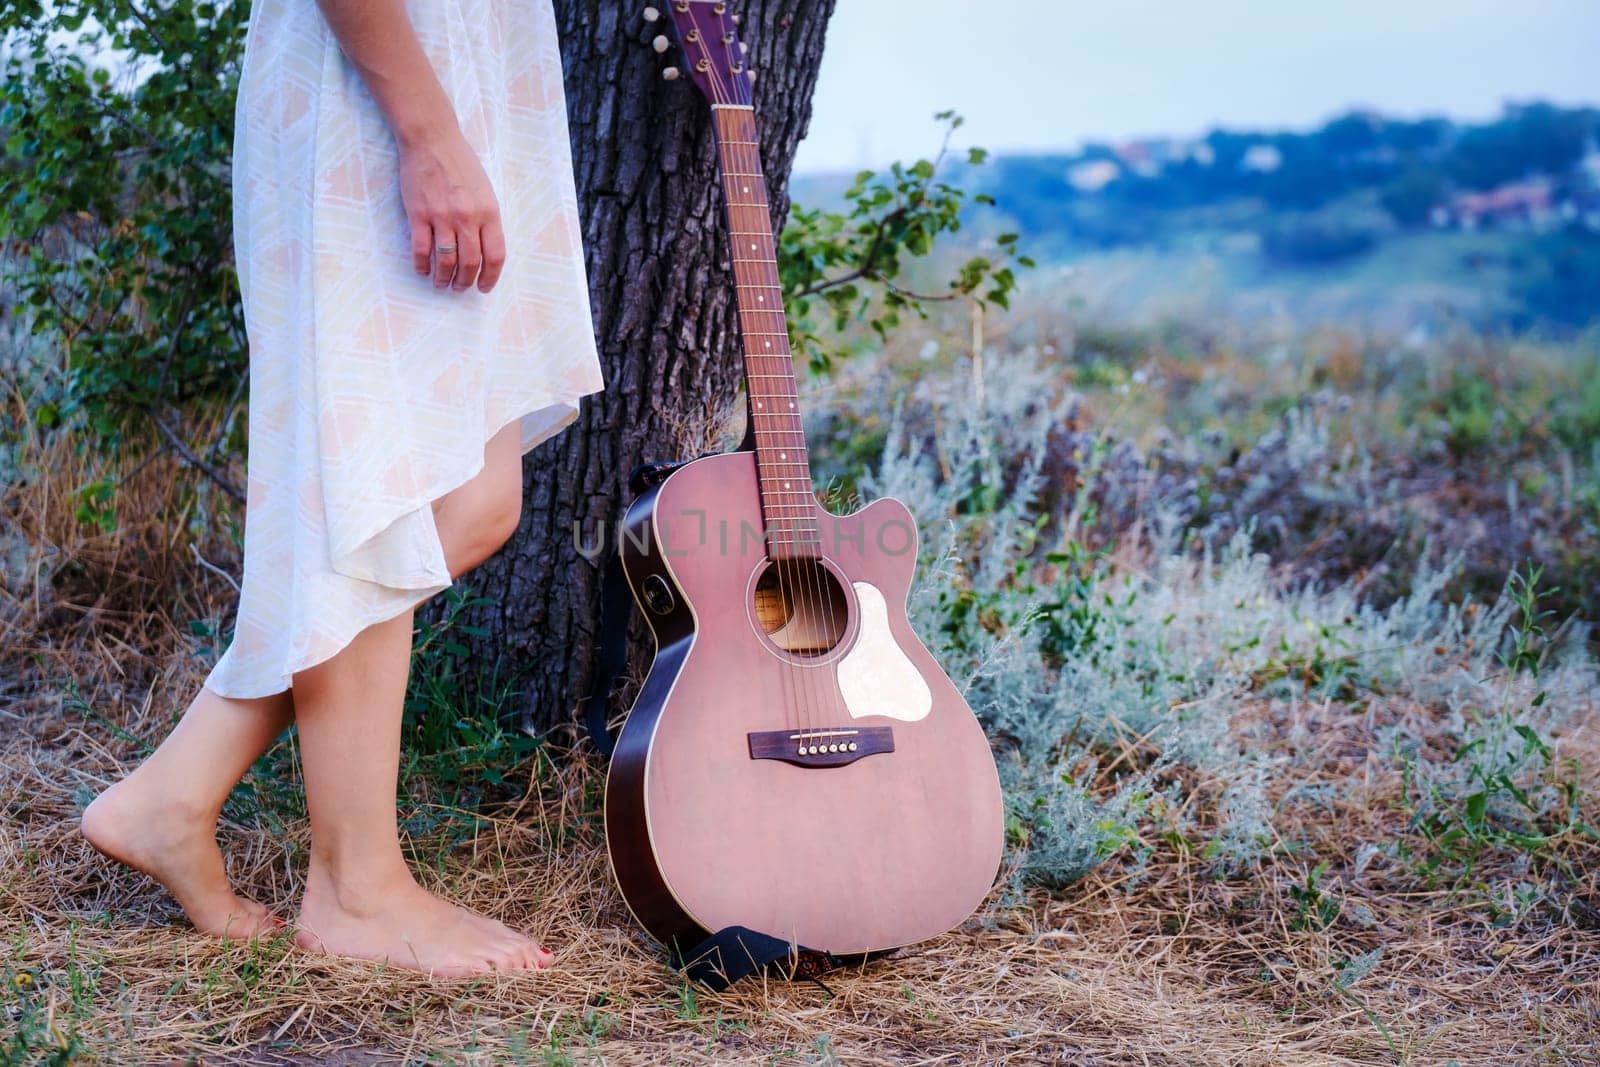 Beautiful romantic background with guitar outdoor. Photo of sensual woman. Art work. Music background download by igor010